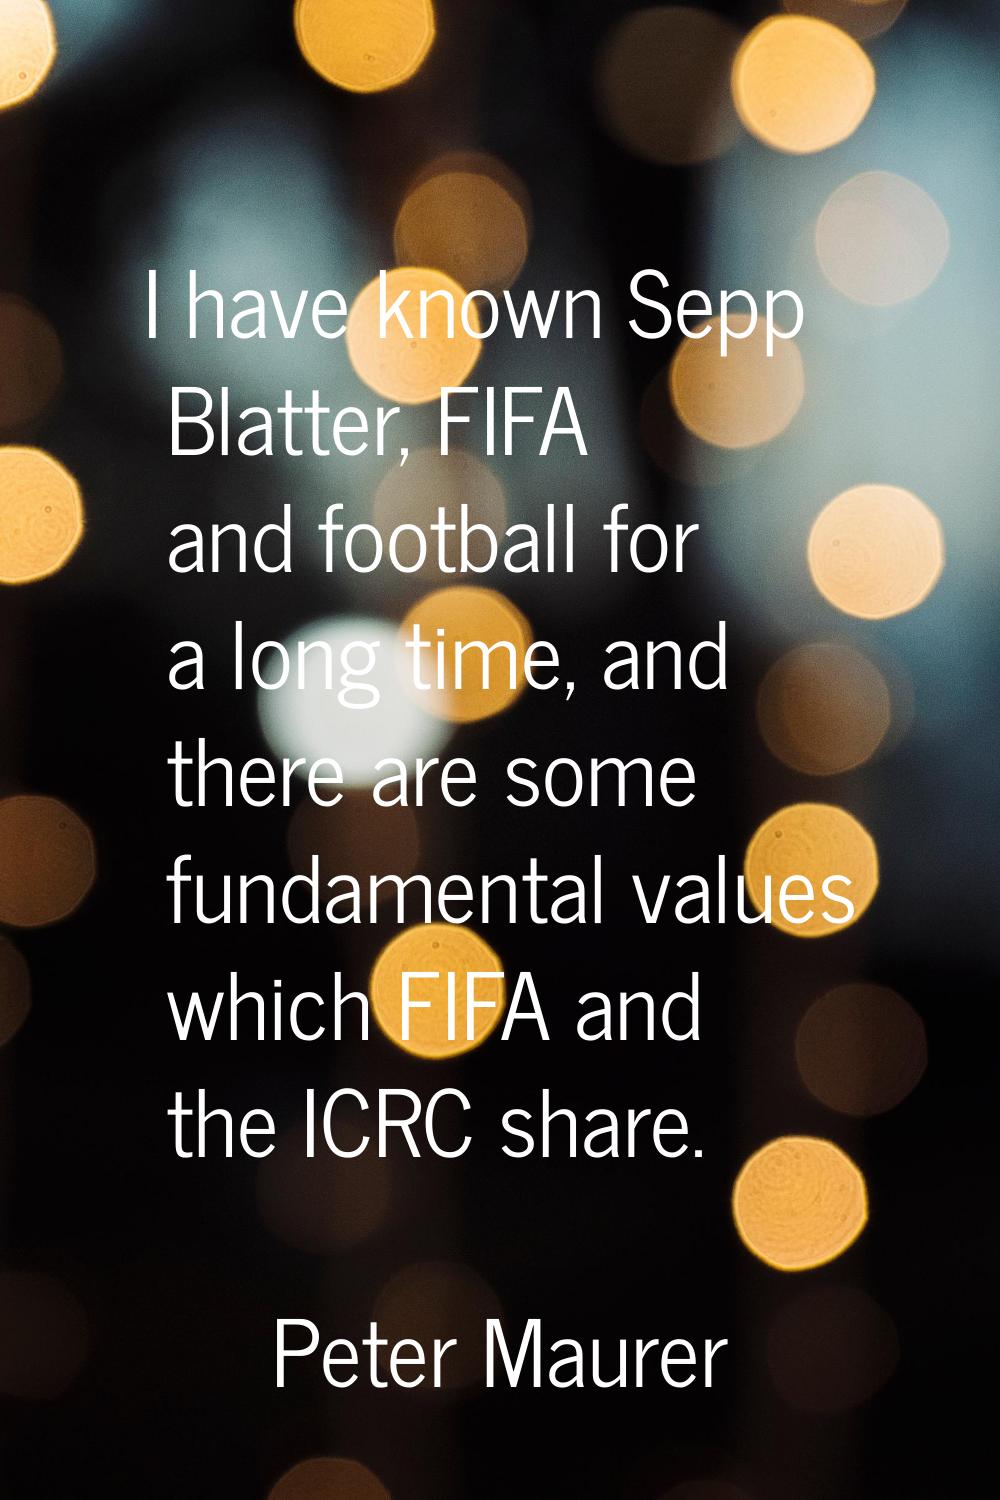 I have known Sepp Blatter, FIFA and football for a long time, and there are some fundamental values